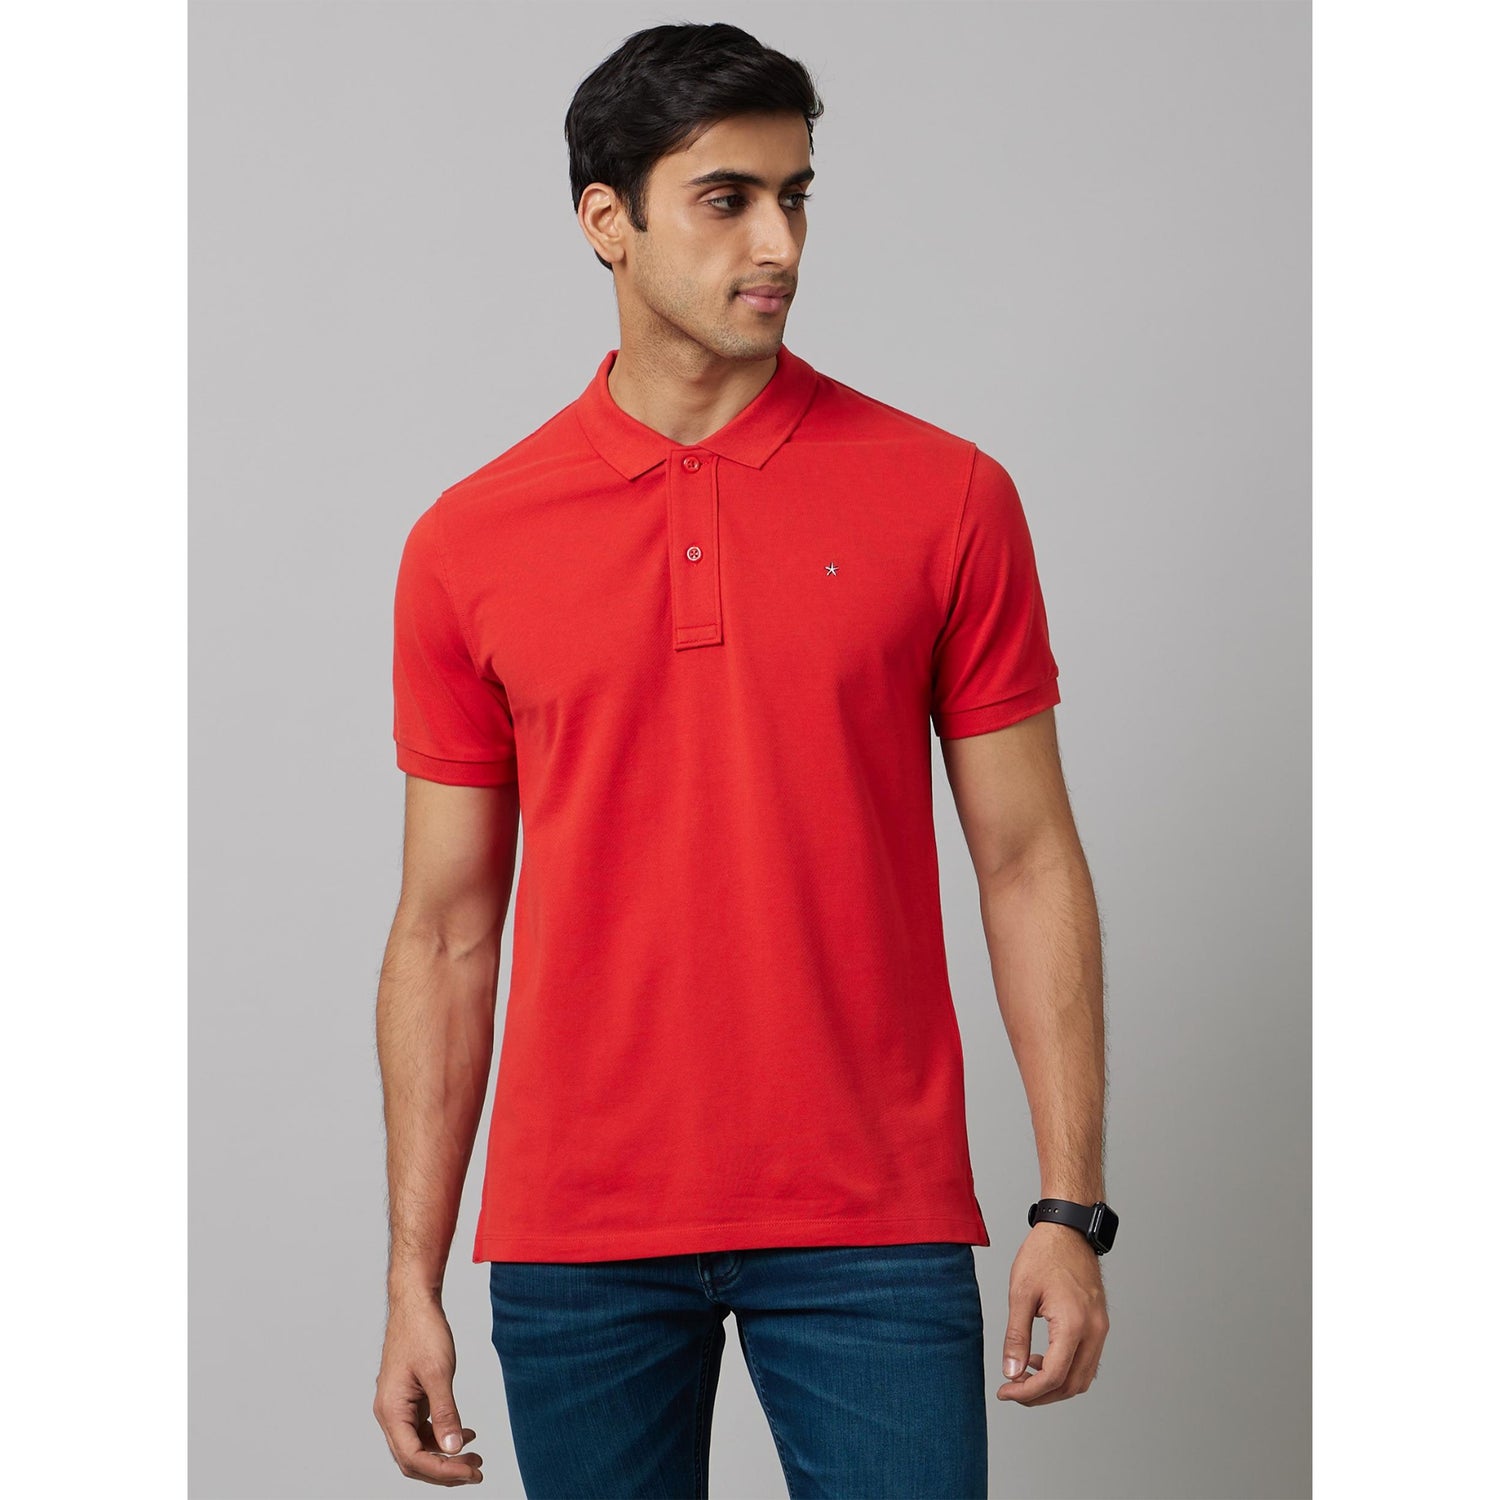 Red Polo Collar Breathable Cotton T-shirt (TEONEPL)